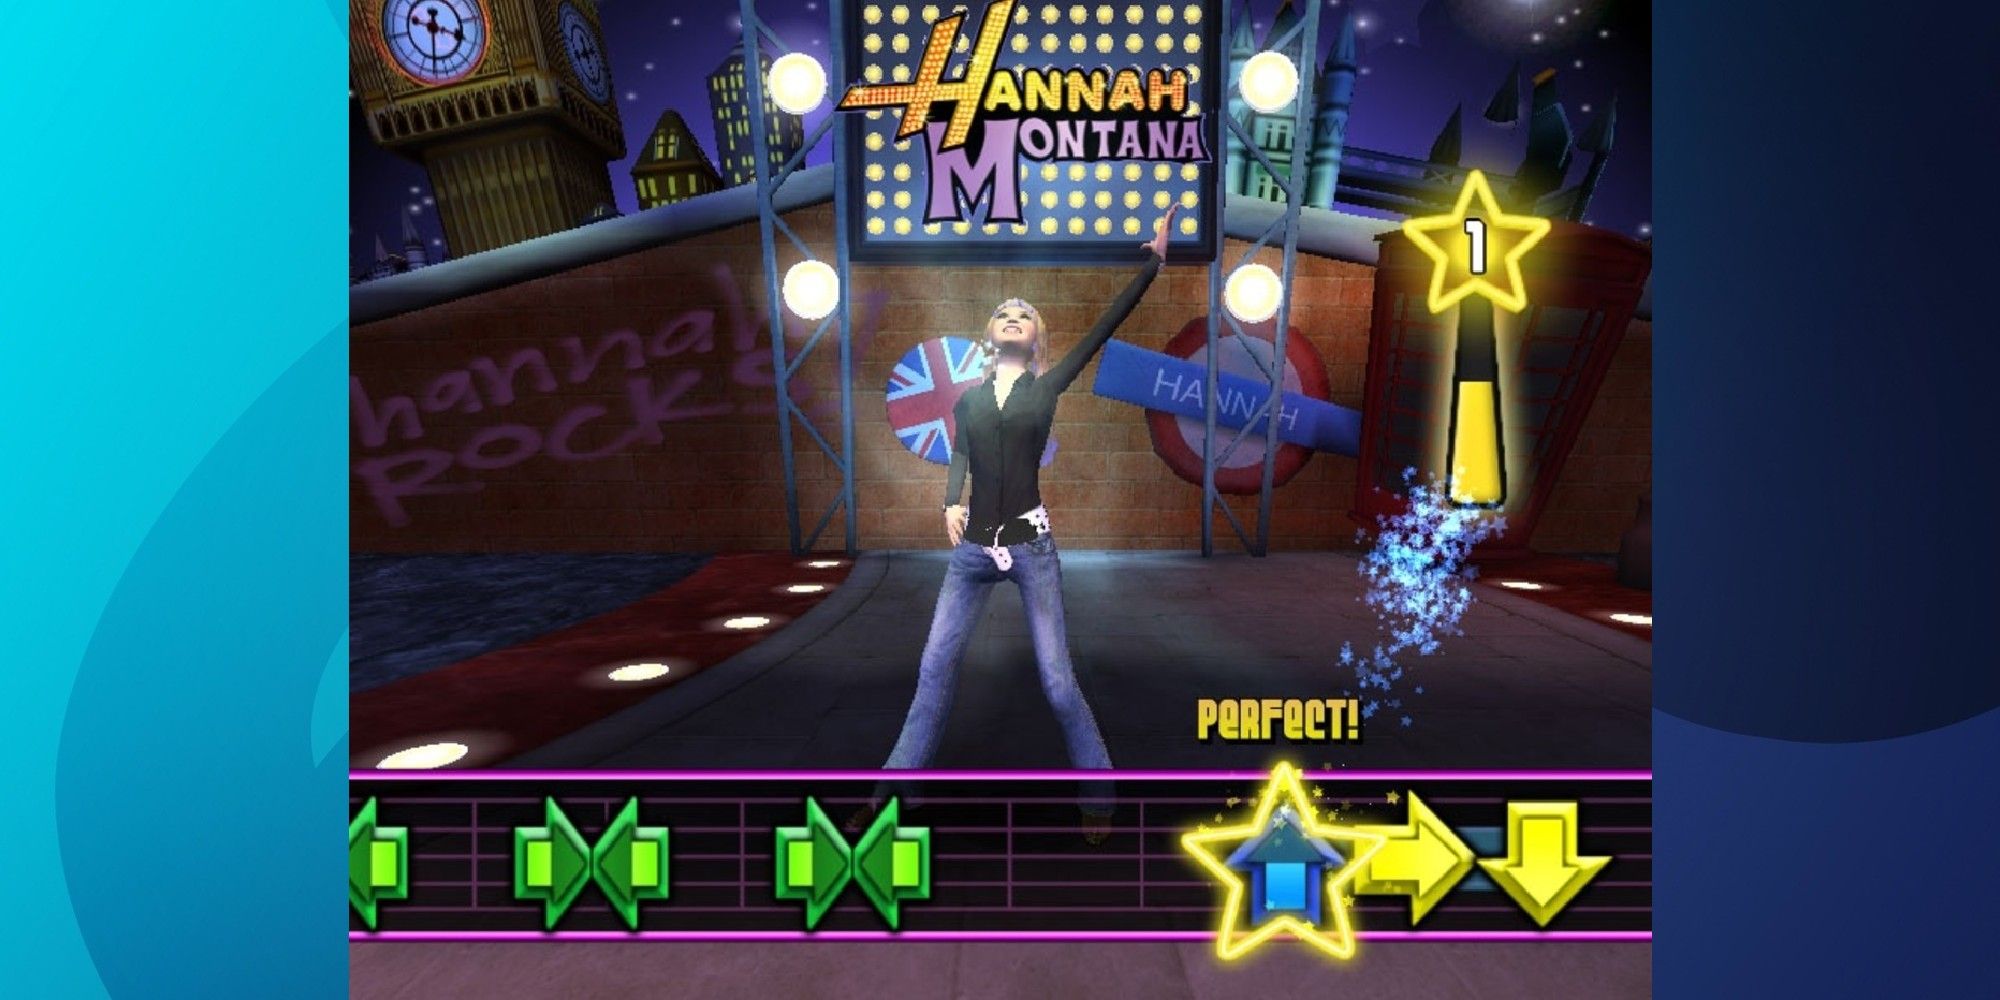 Hannah Montana is dancing on stage with the rhythm game UI at the bottom of the screen